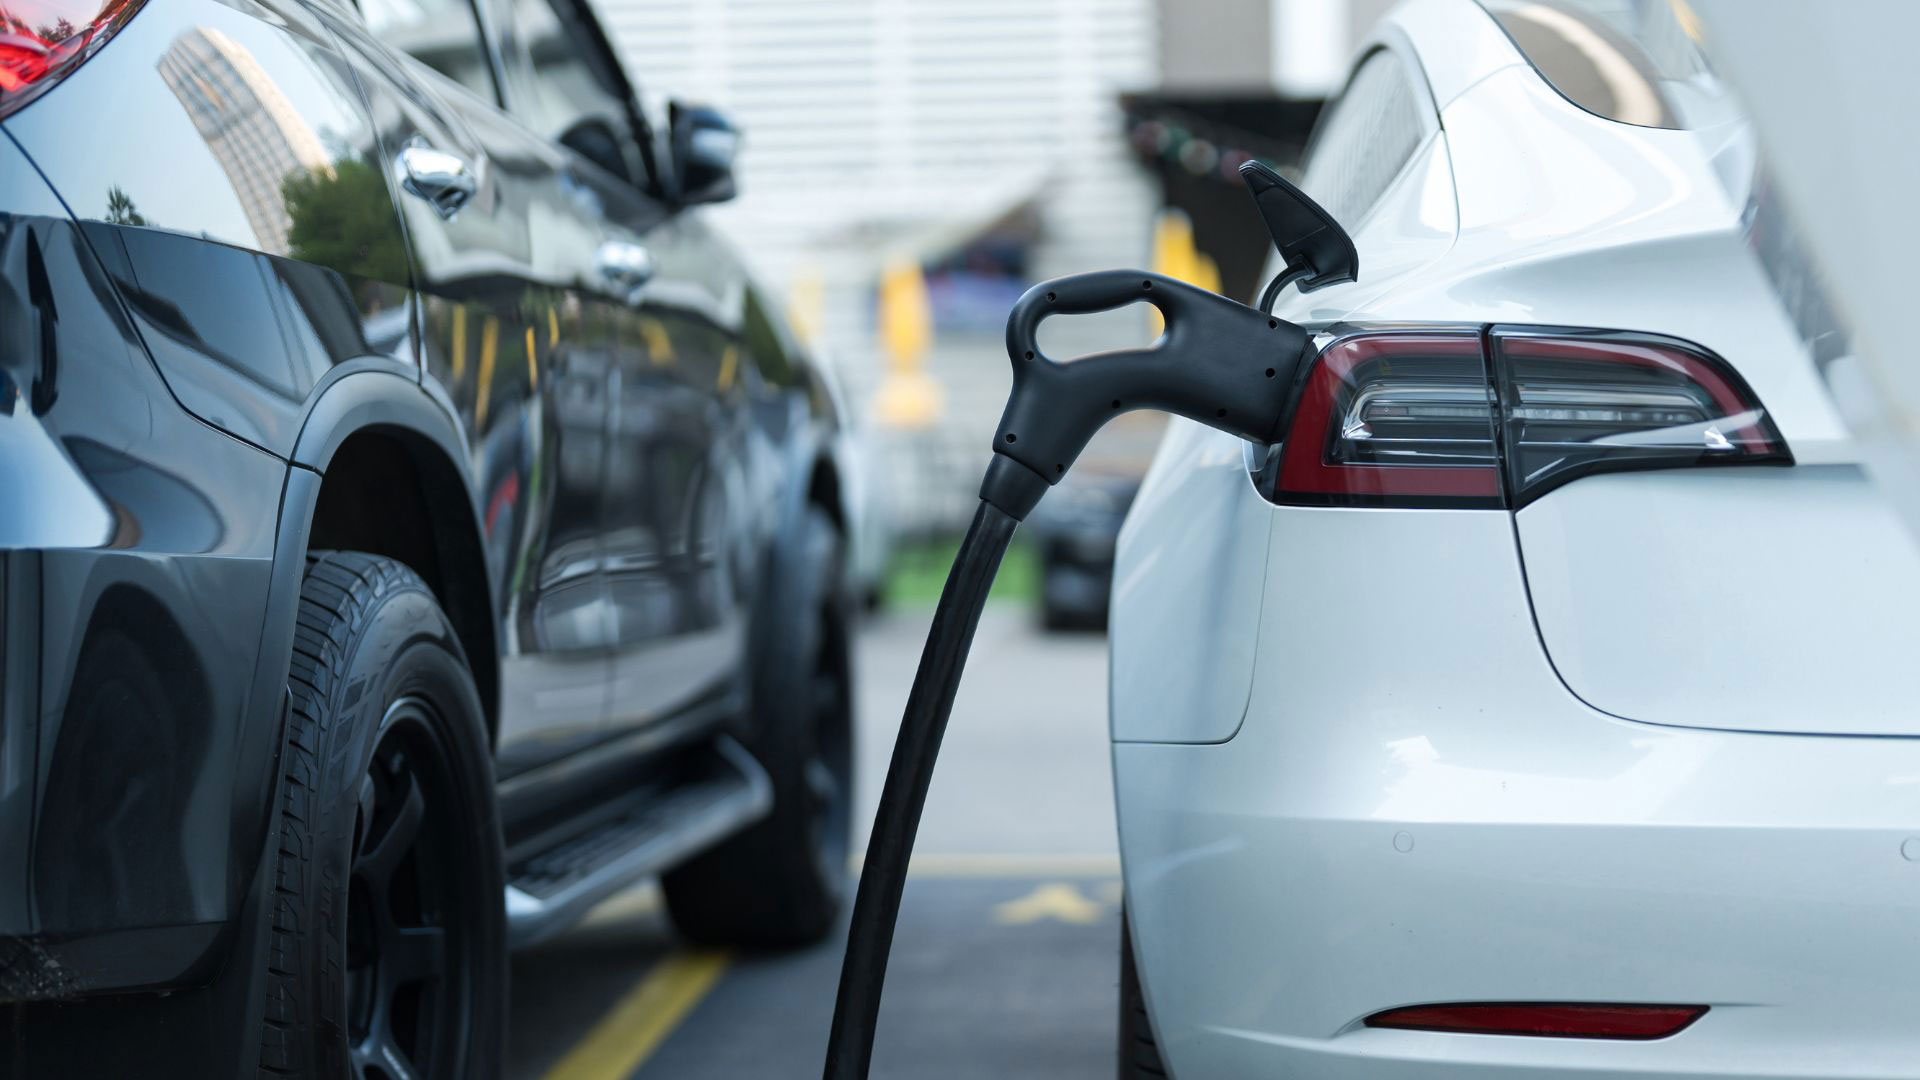 “Charge Up LA!” with $1,000 Rebate on Qualifying EV Chargers